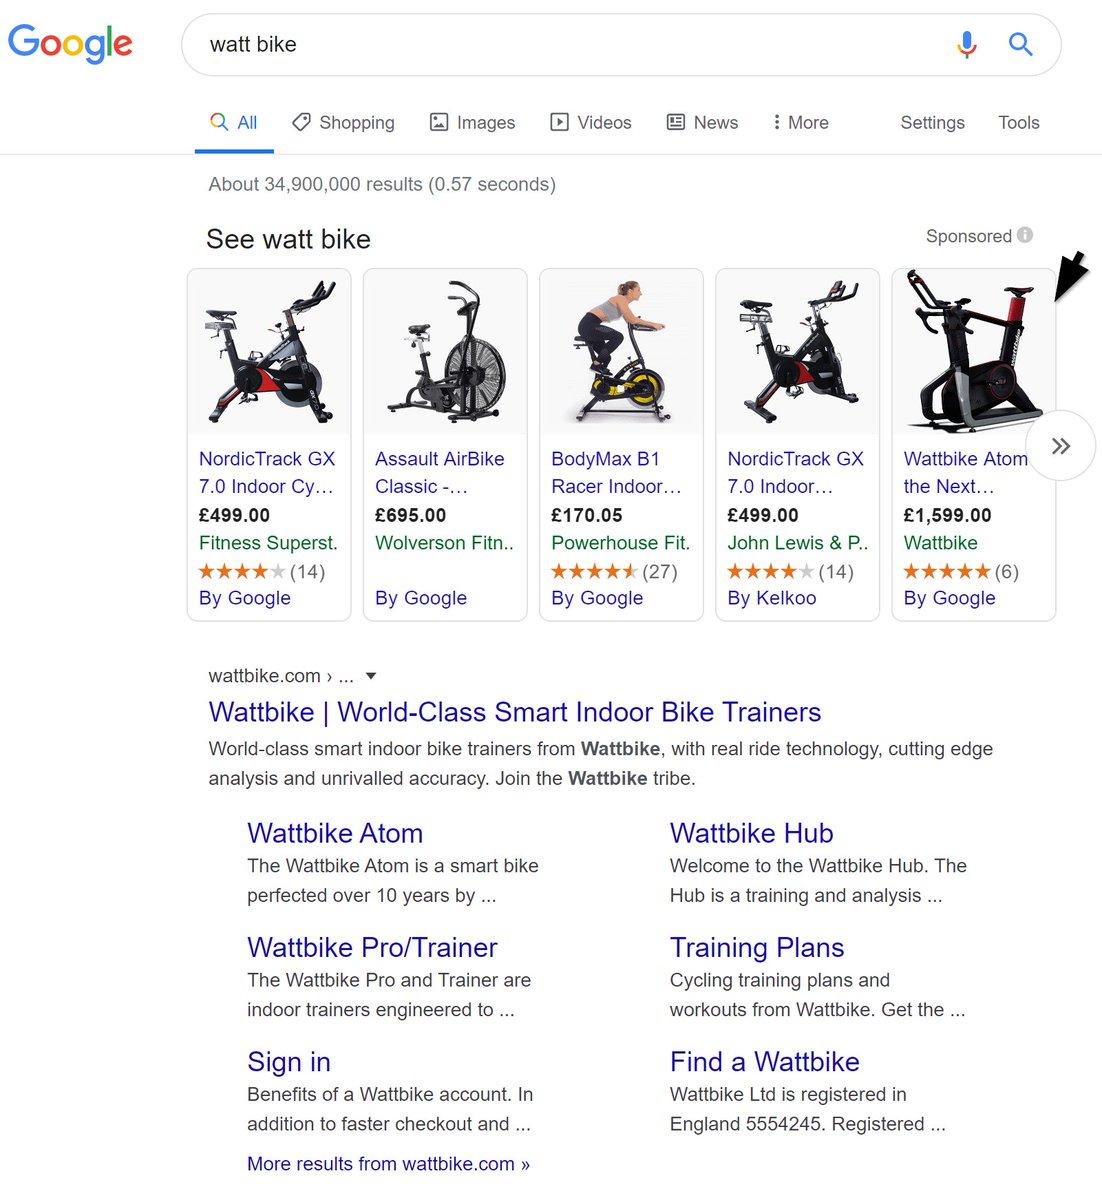 49. PPC. In some situations it's sensible to pay up for your own brand ad. Eg here, there's a block of shopping ads above the 'Watt Bike' ad when you search for their name. Ie, there's a slim chance a potential customer starts looking into a competitor's product instead.